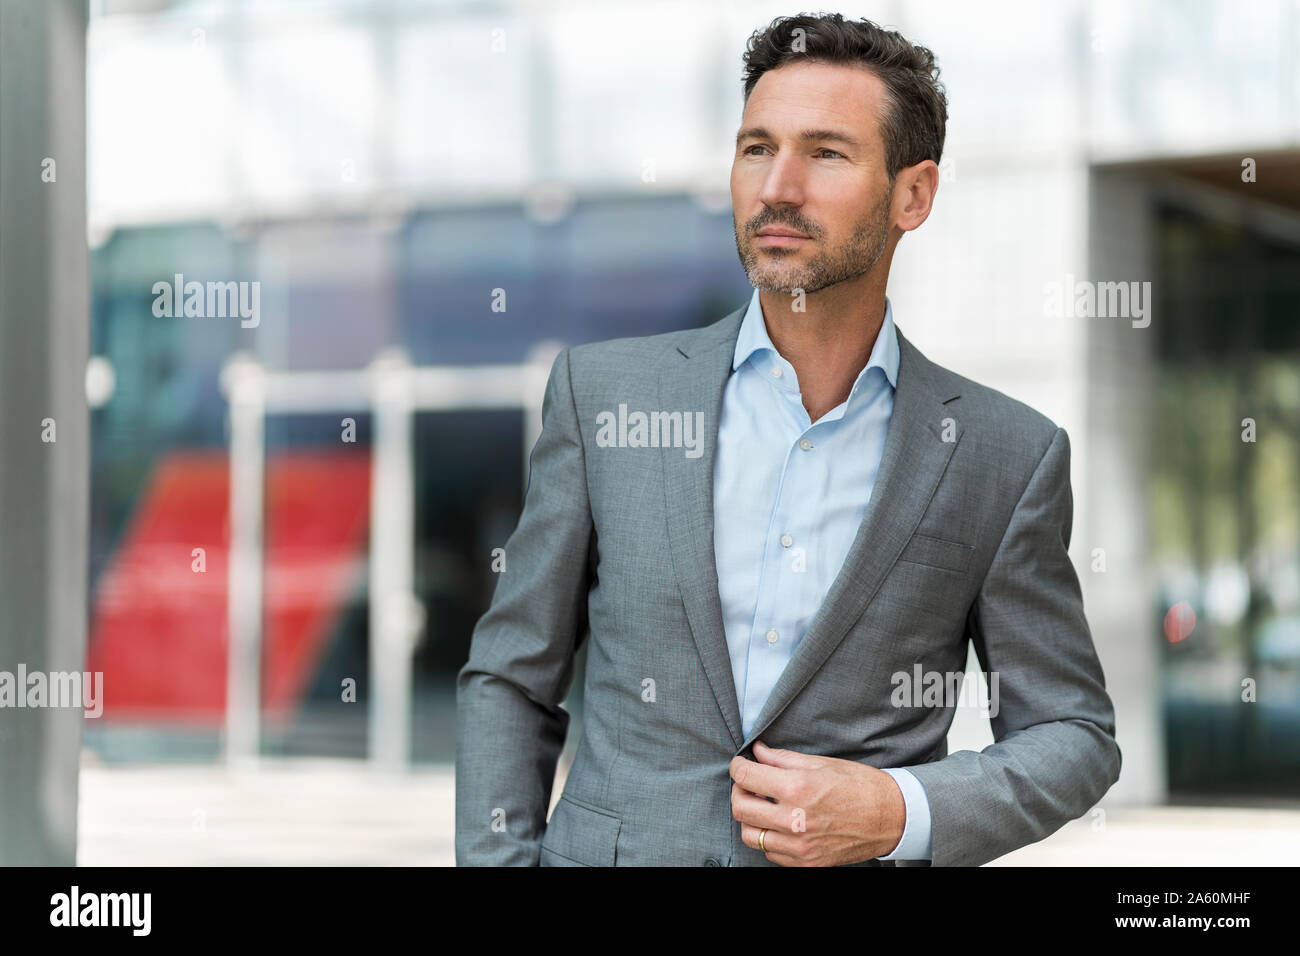 Portrait of businessman in the city Stock Photo